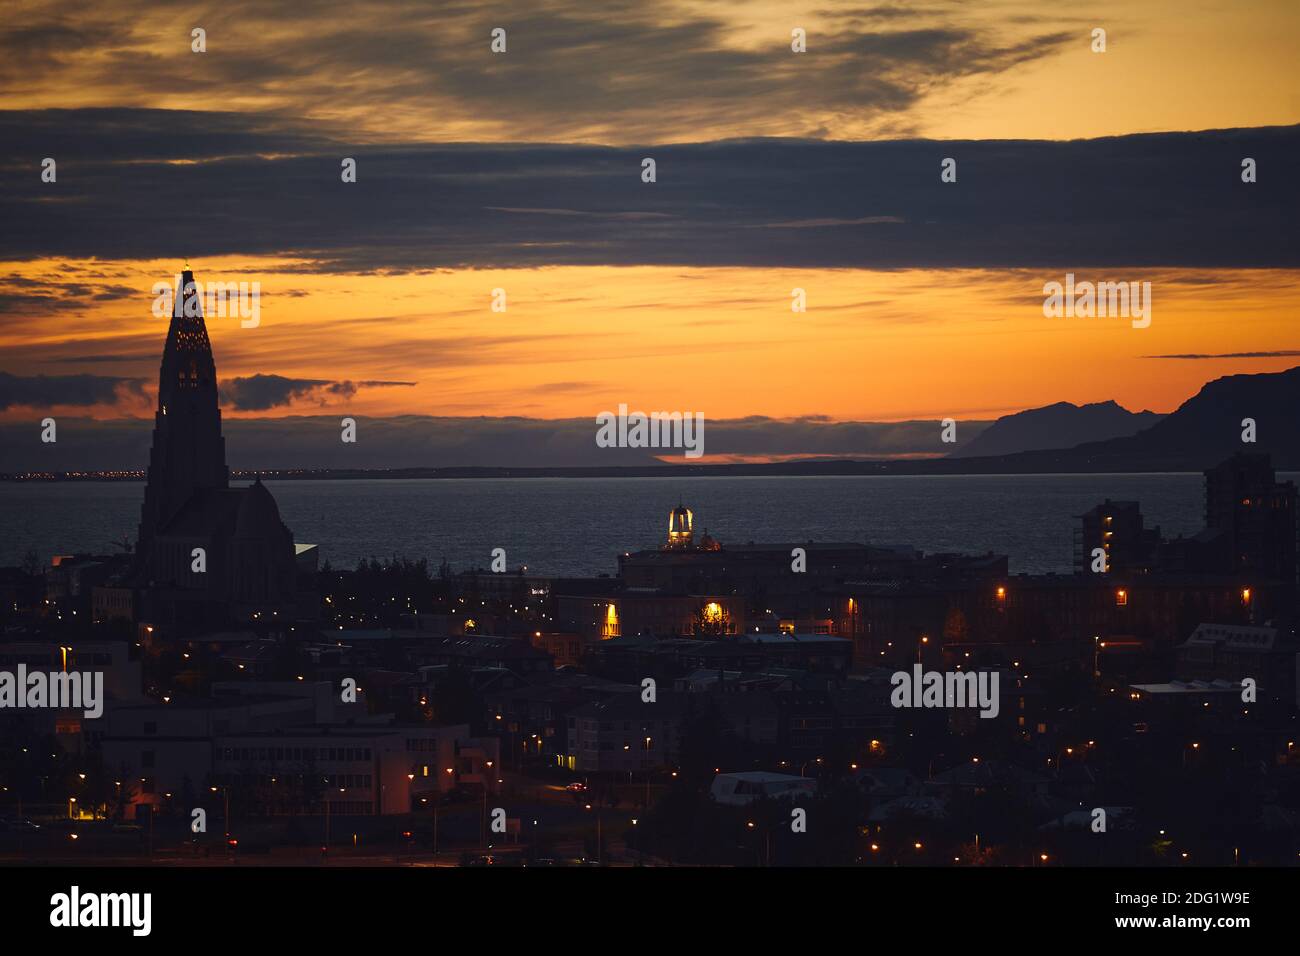 Beautiful night dusk view of Reykjavik, Iceland, aerial view with Hallgrimskirkja lutheran church, with scenery beyond the city, Esja mountain and Fax Stock Photo